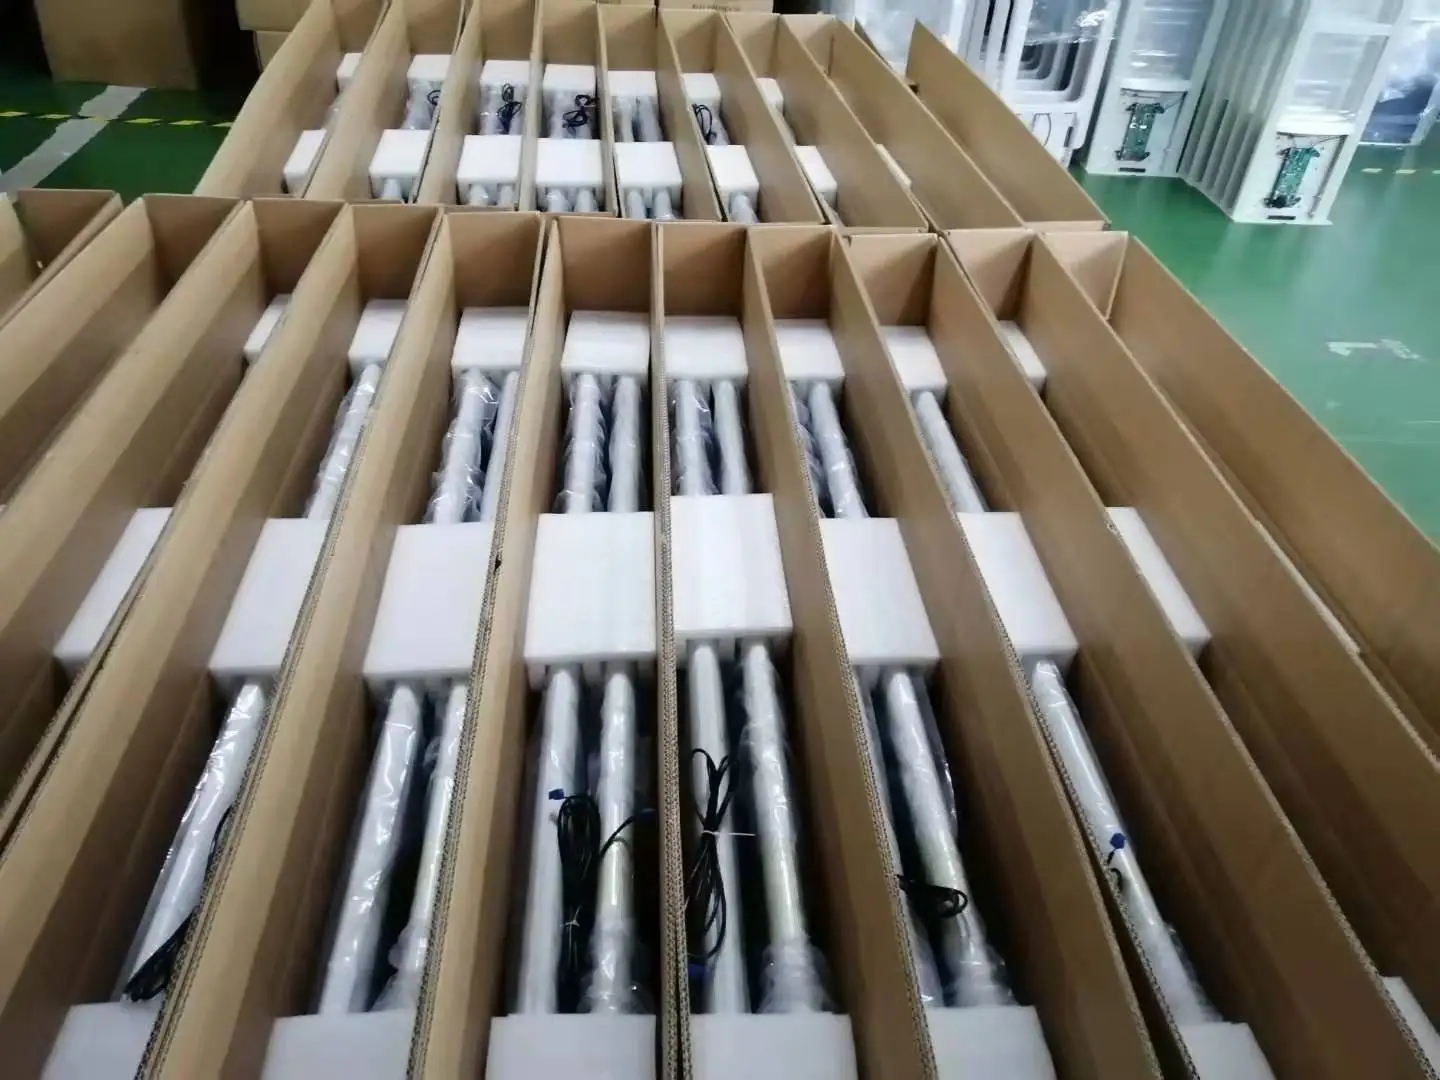 Anti-shoplifting Device RF jammer EAS HR-Tenda EAS Phone Jammers Dual 8.2mhz Alarm System EAS Library Quality Guaranteed enlarge